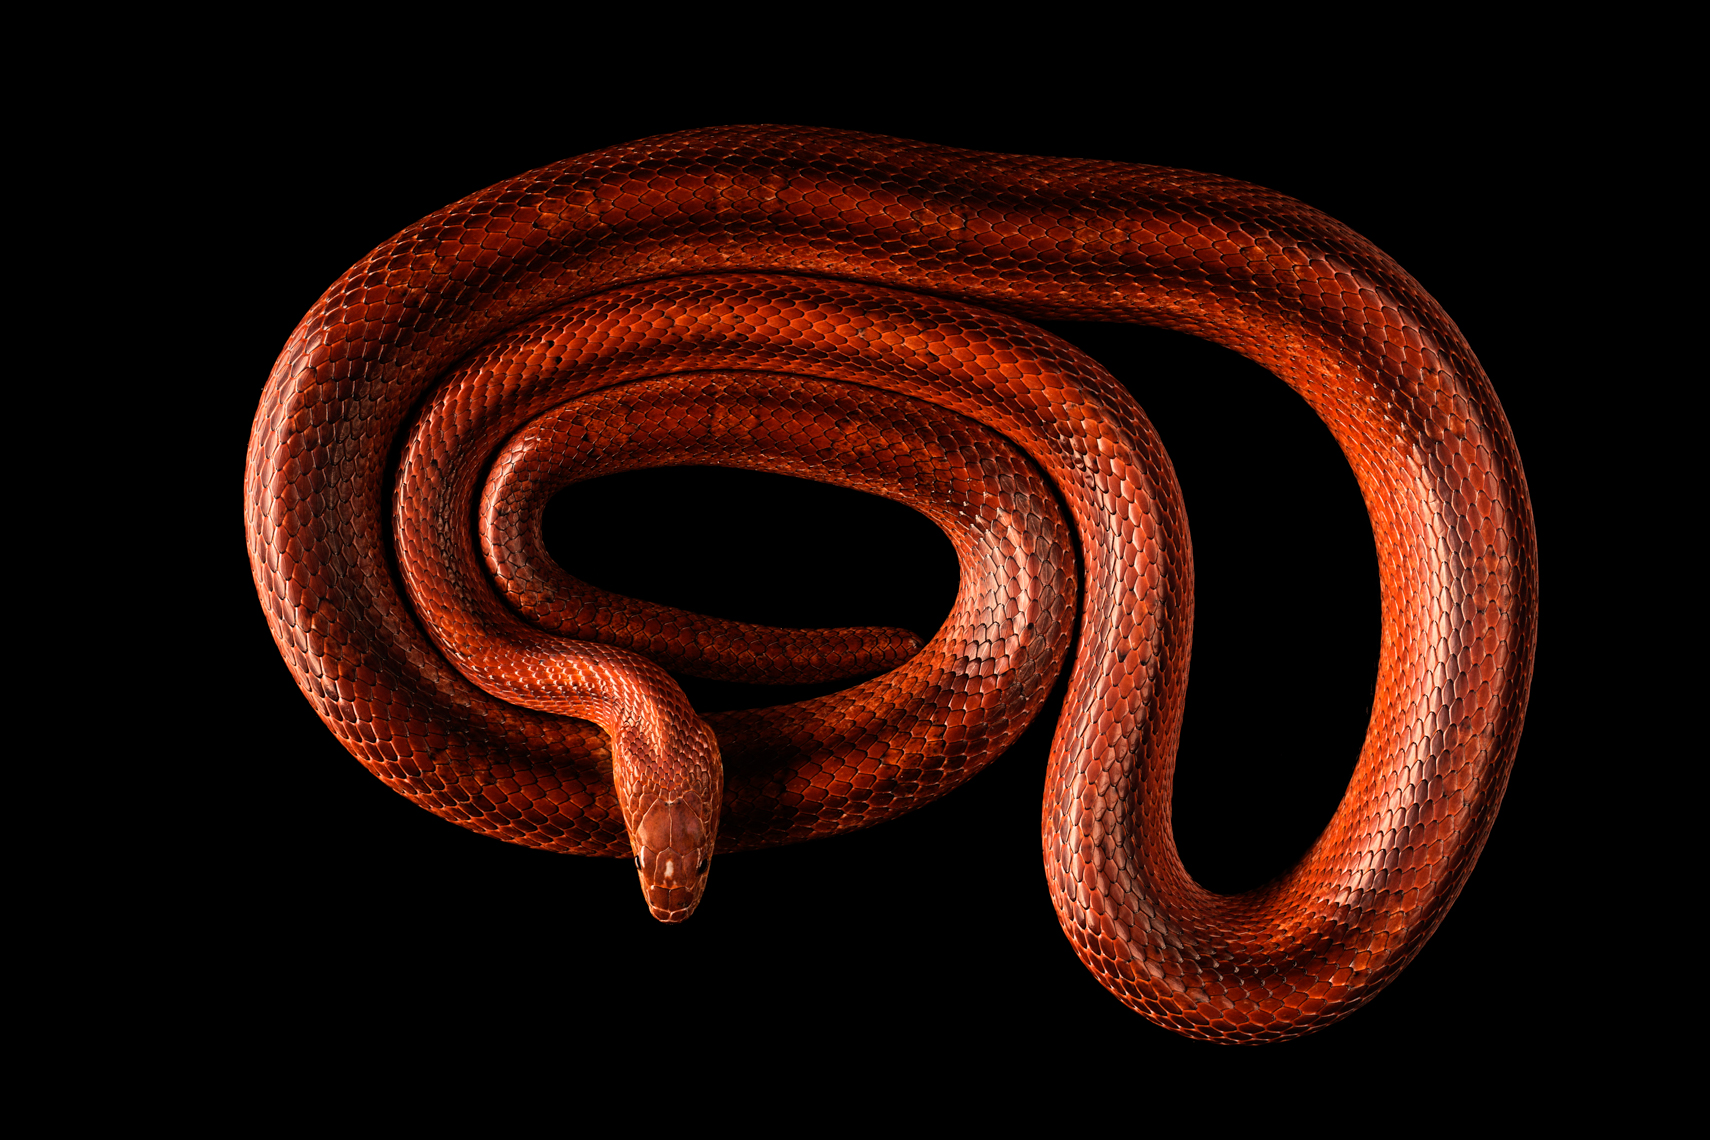 Corn Snake photographed from above